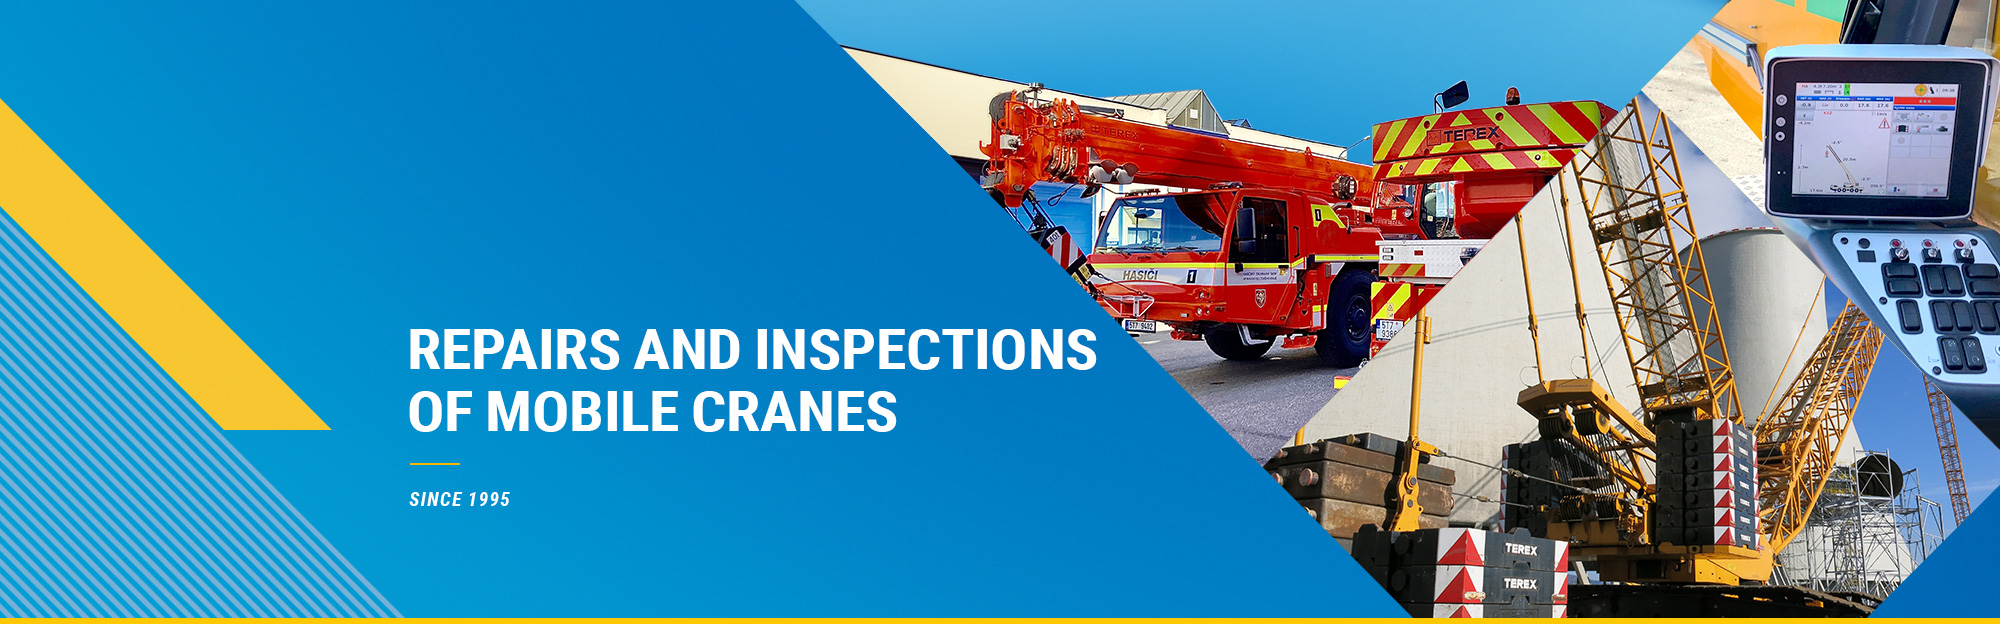 Repairs and inspections of mobile cranes